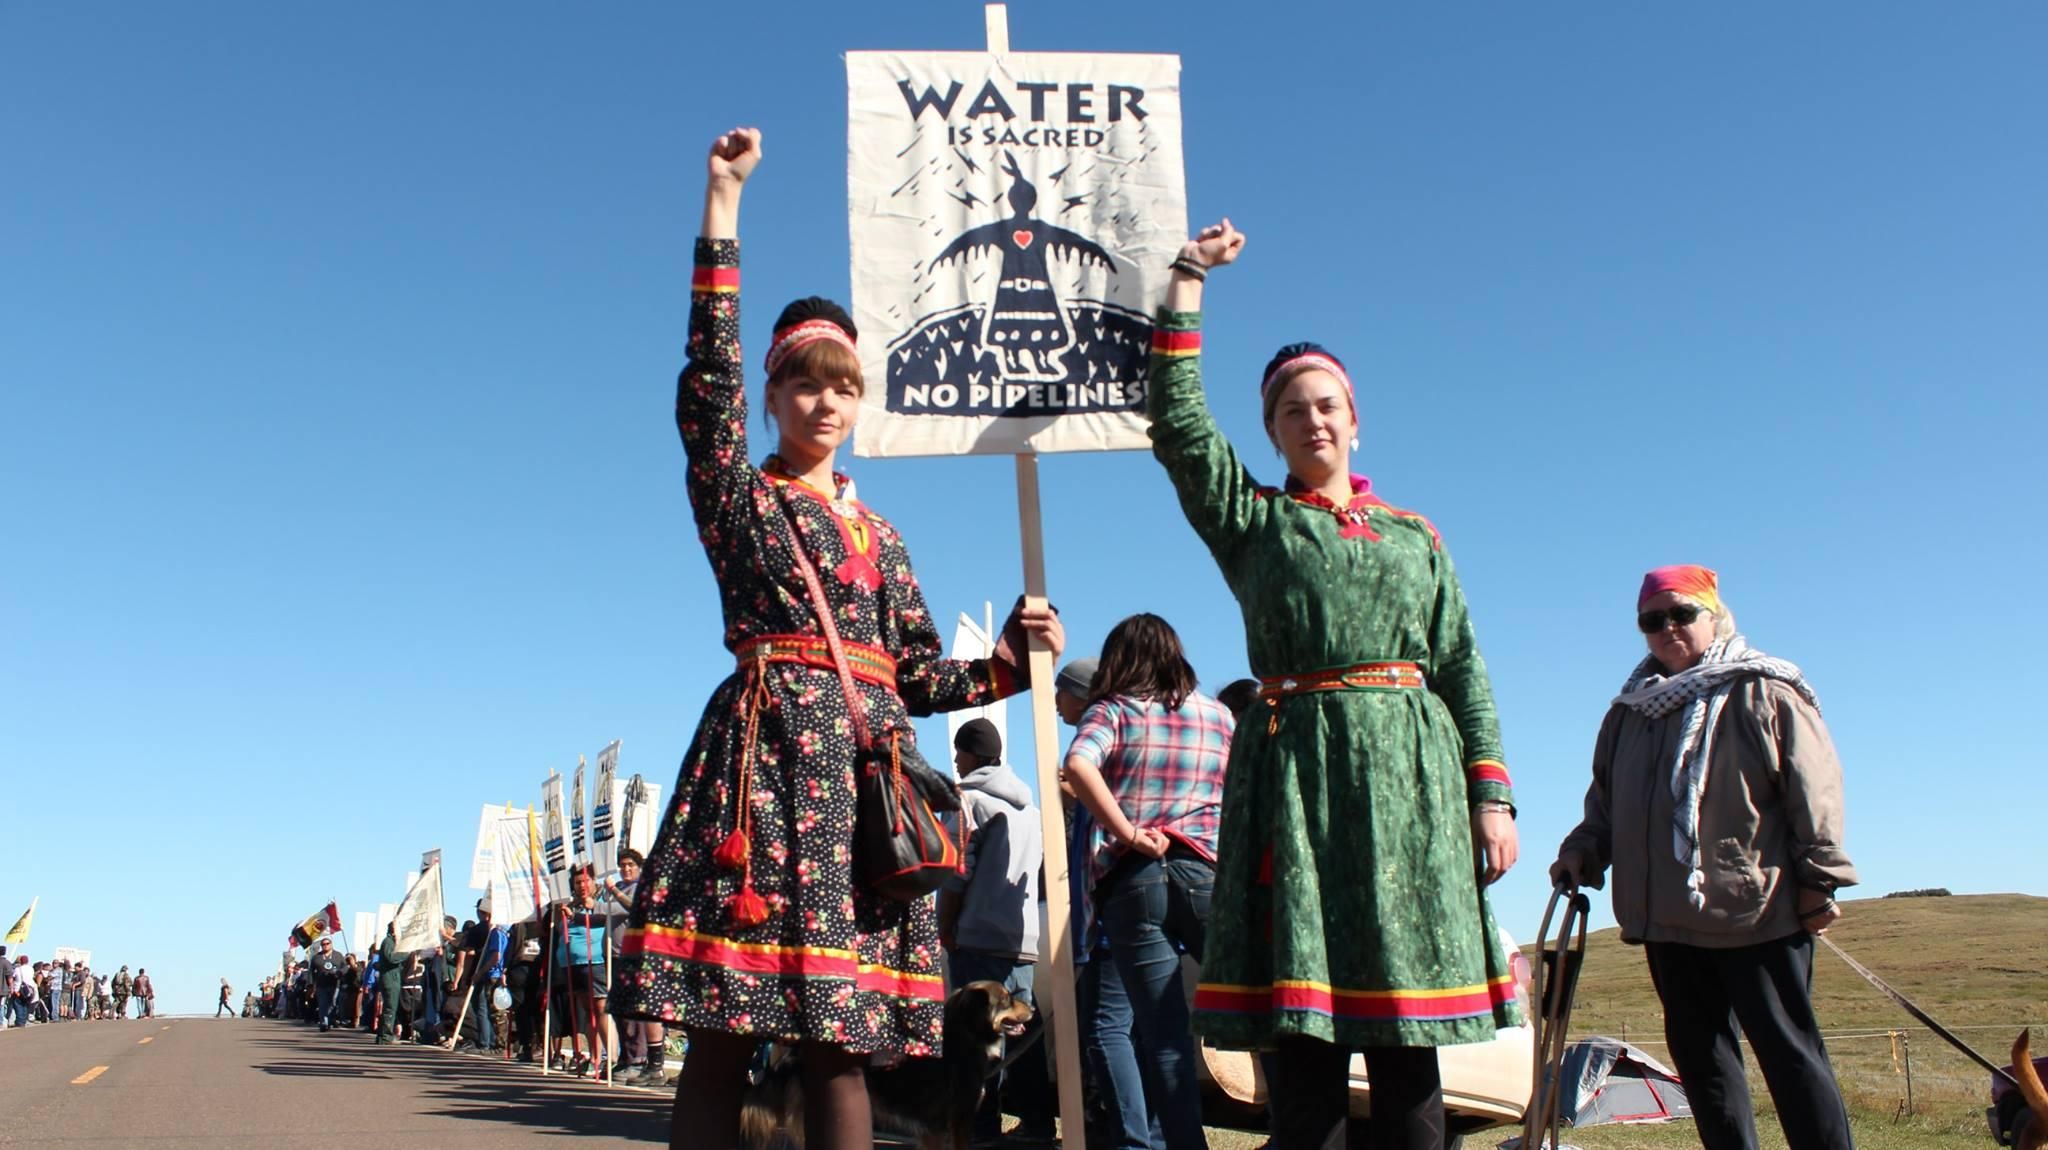 Indigenous Sami people from Norway join the Standing Rock Sioux in their protest against the Dakota Access Pipeline.